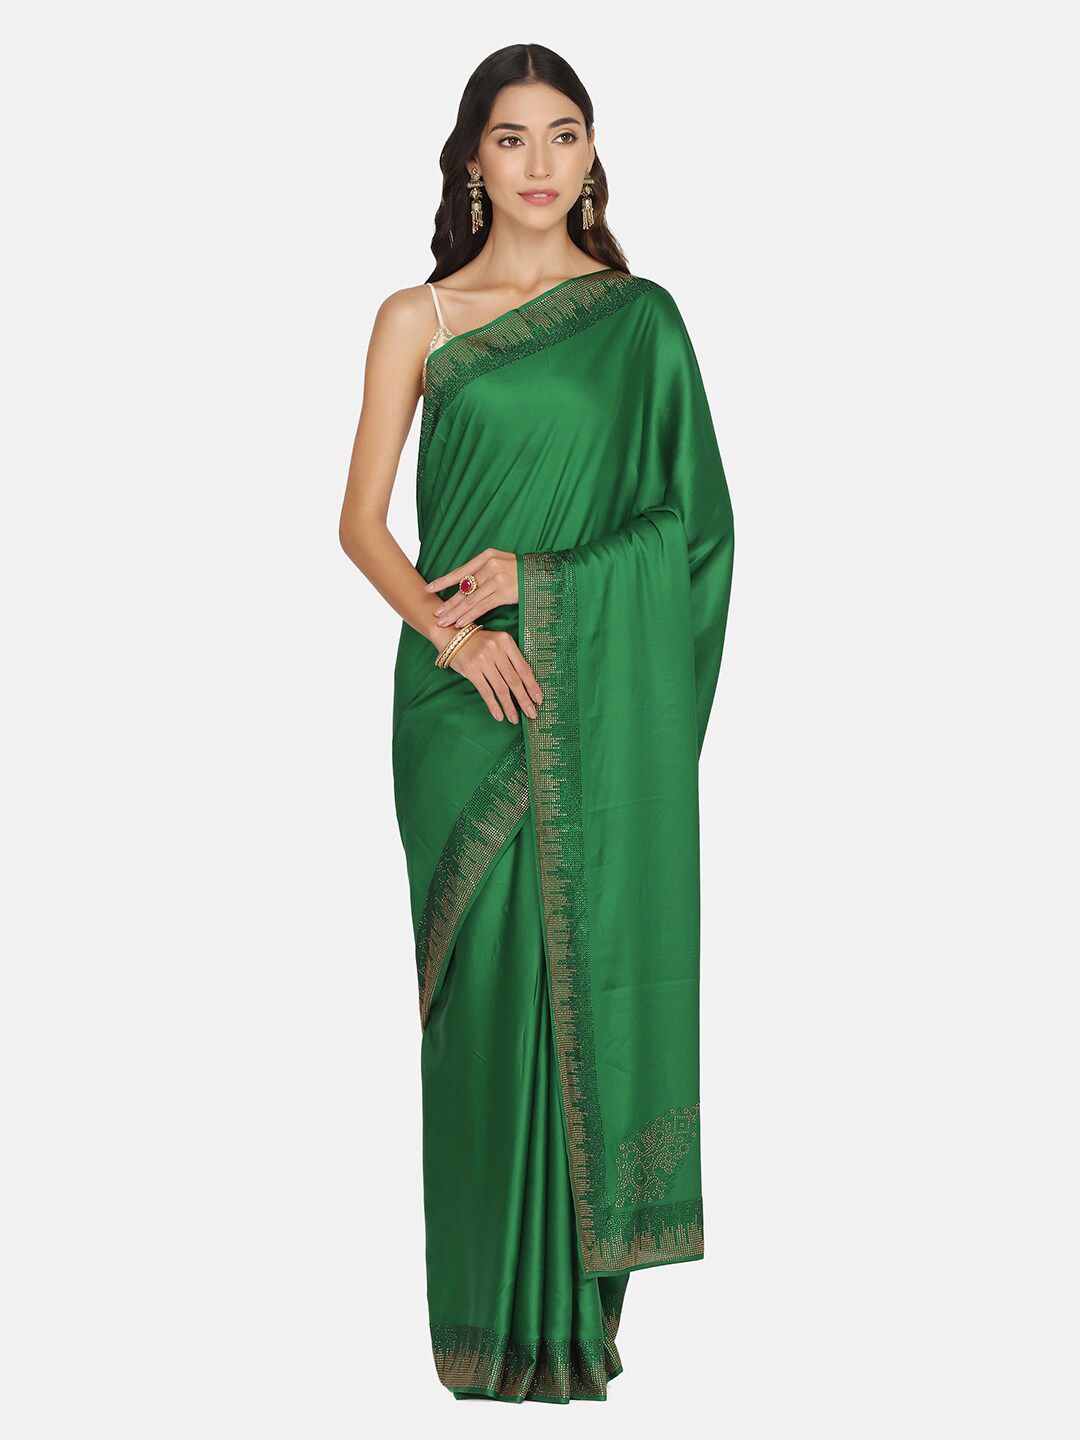 BOMBAY SELECTIONS Green & Gold-Toned Beads and Stones Satin Saree Price in India